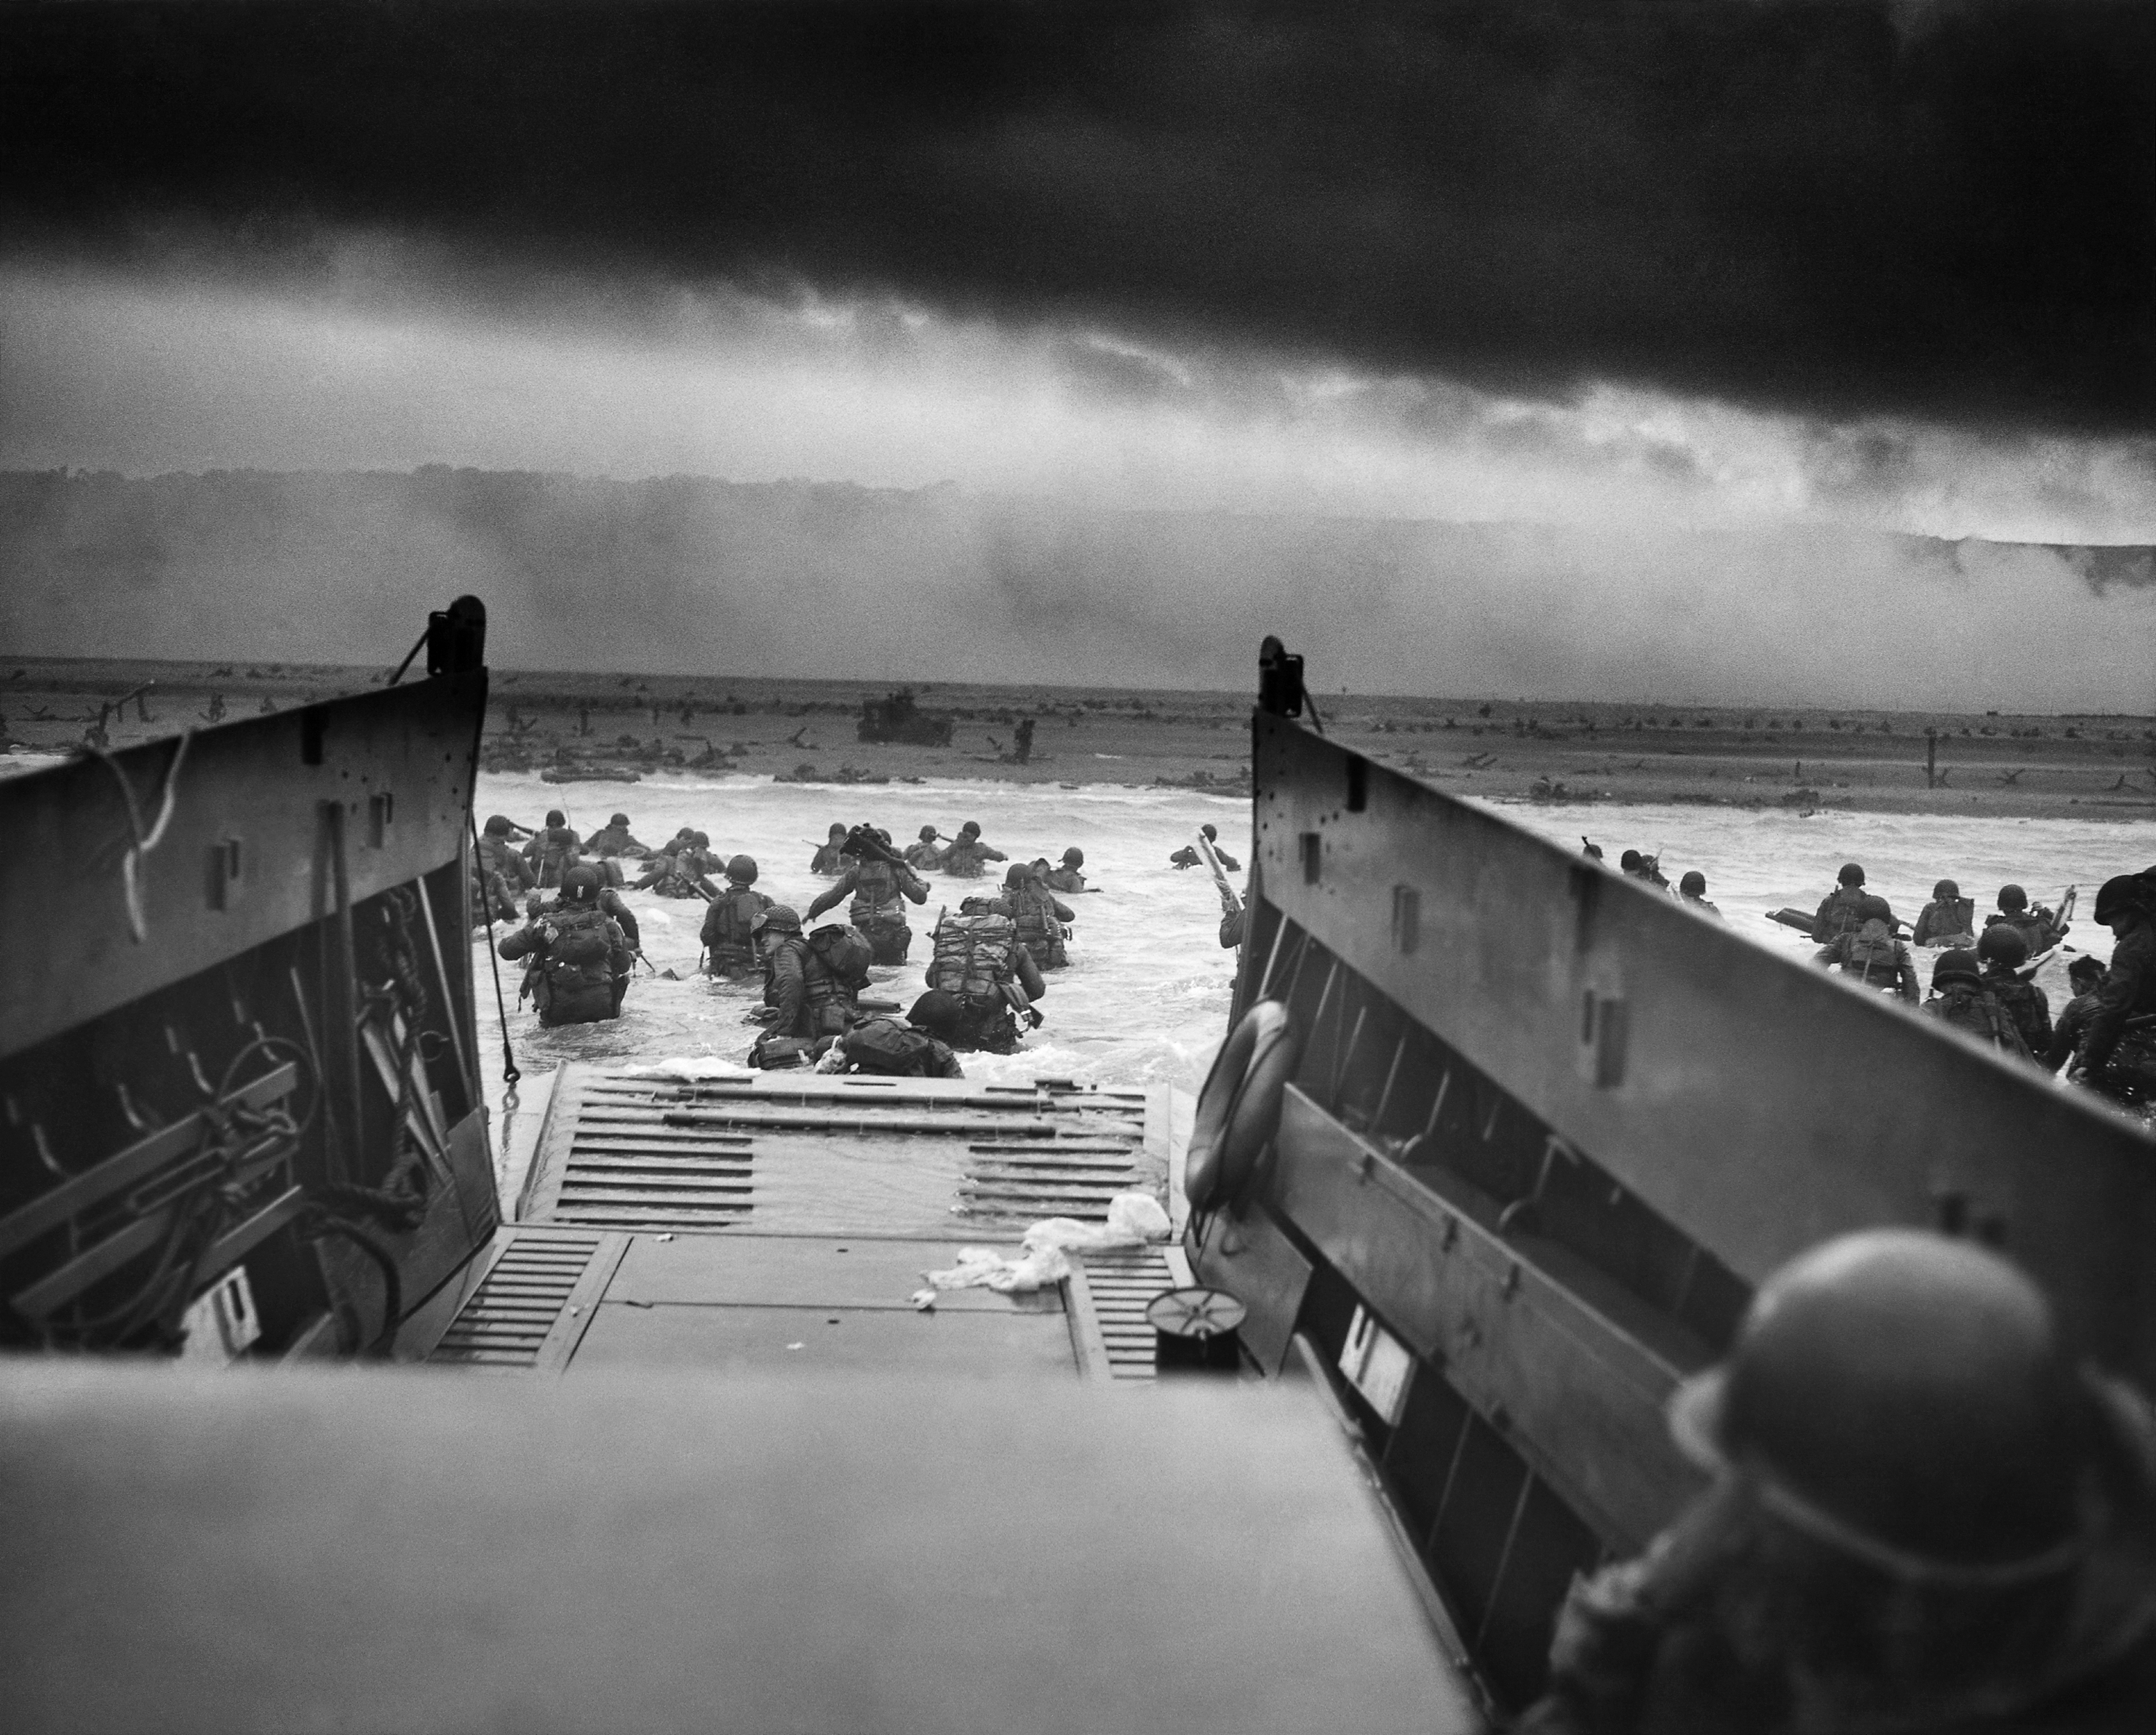 American forces landing on the beaches of Normandy on June 6, 1944